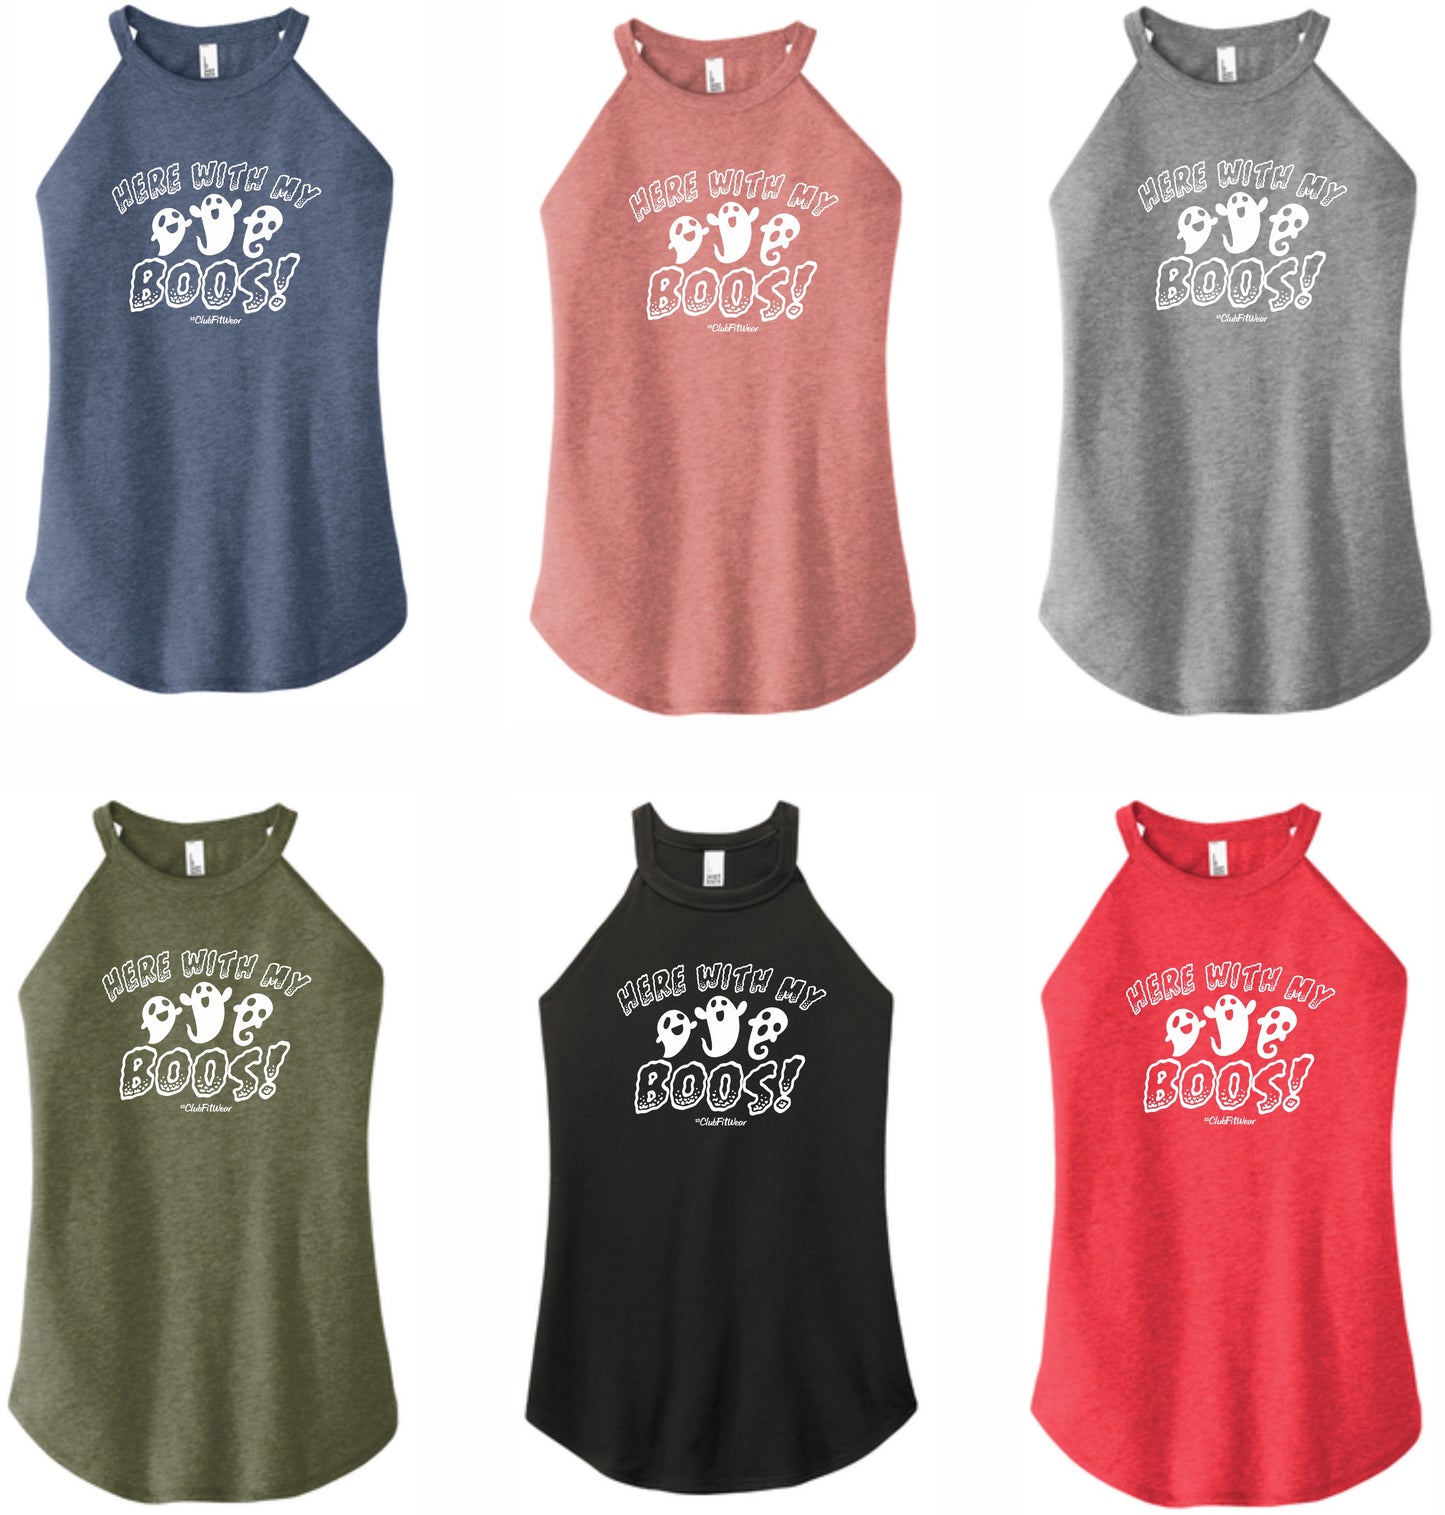 Here With My Boos! - High Neck Rocker Tank